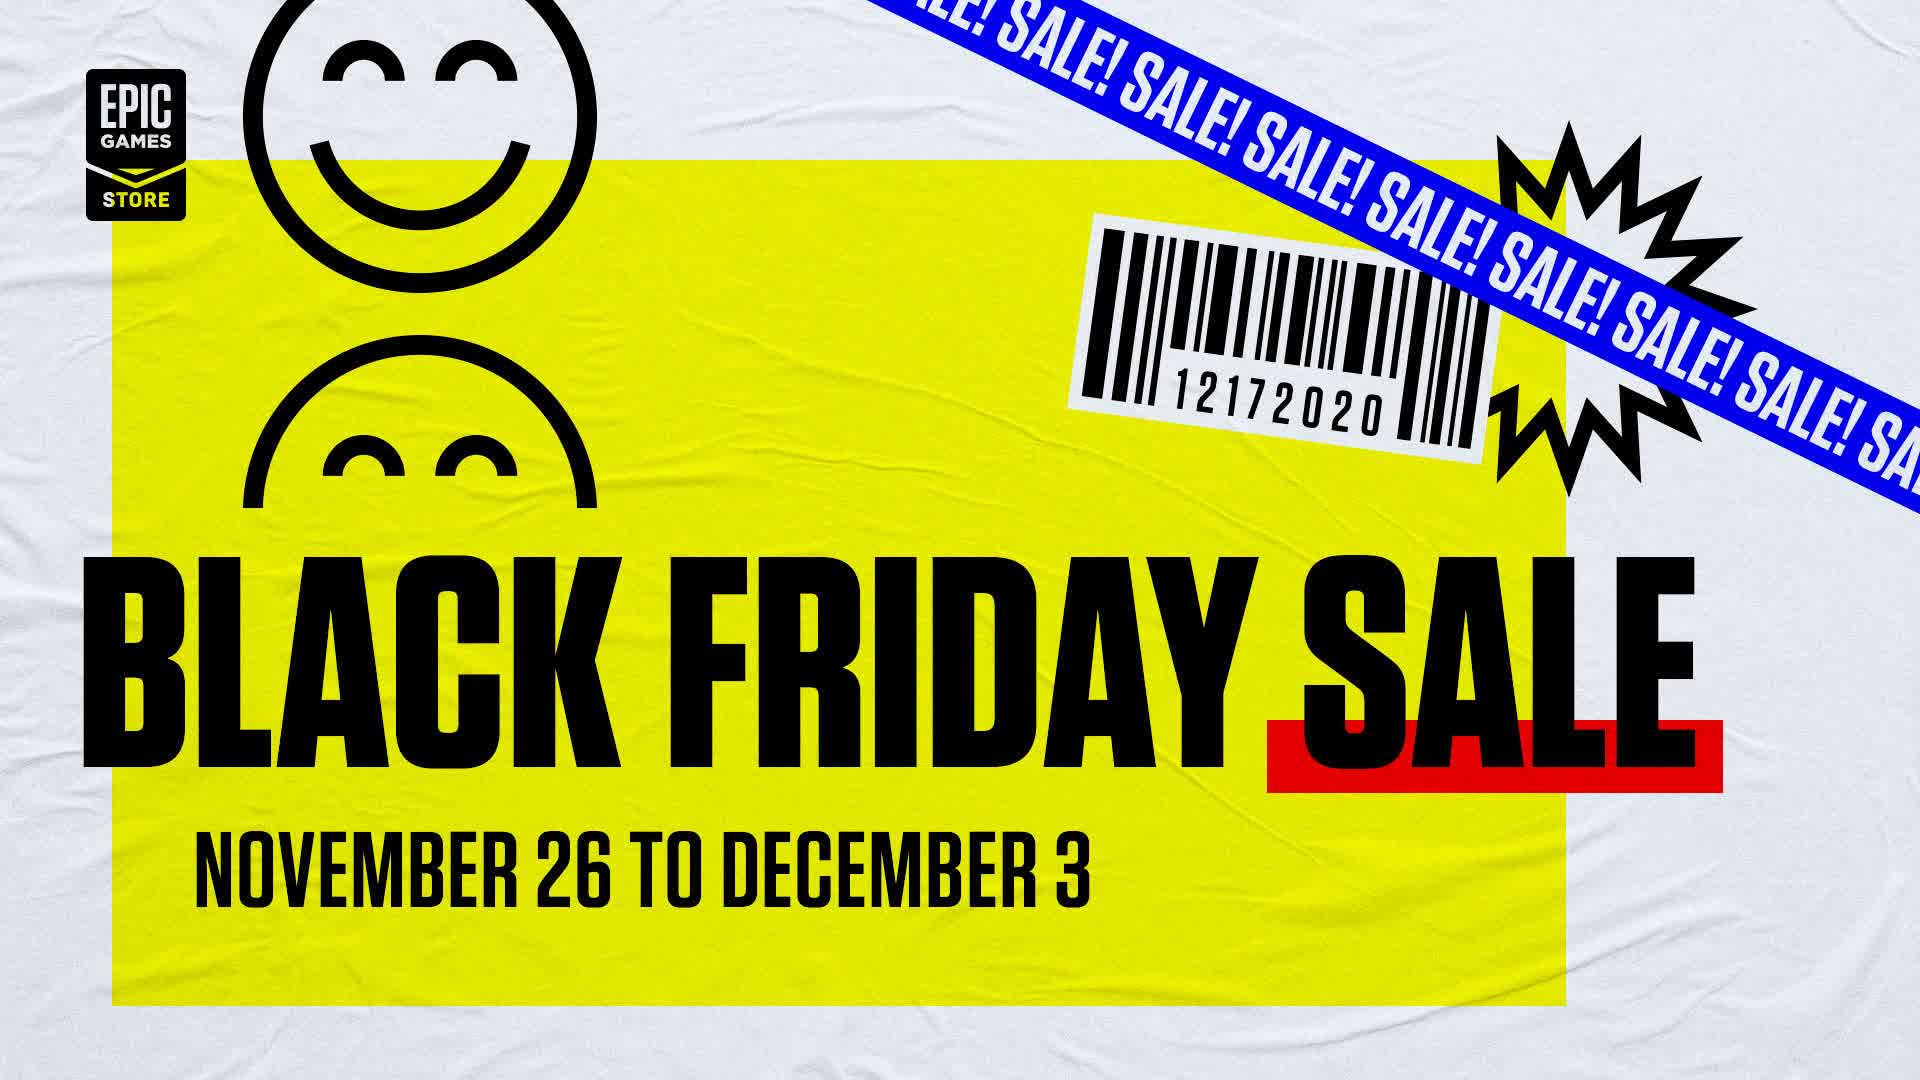 The Epic Games Store Black Friday Sale is underway